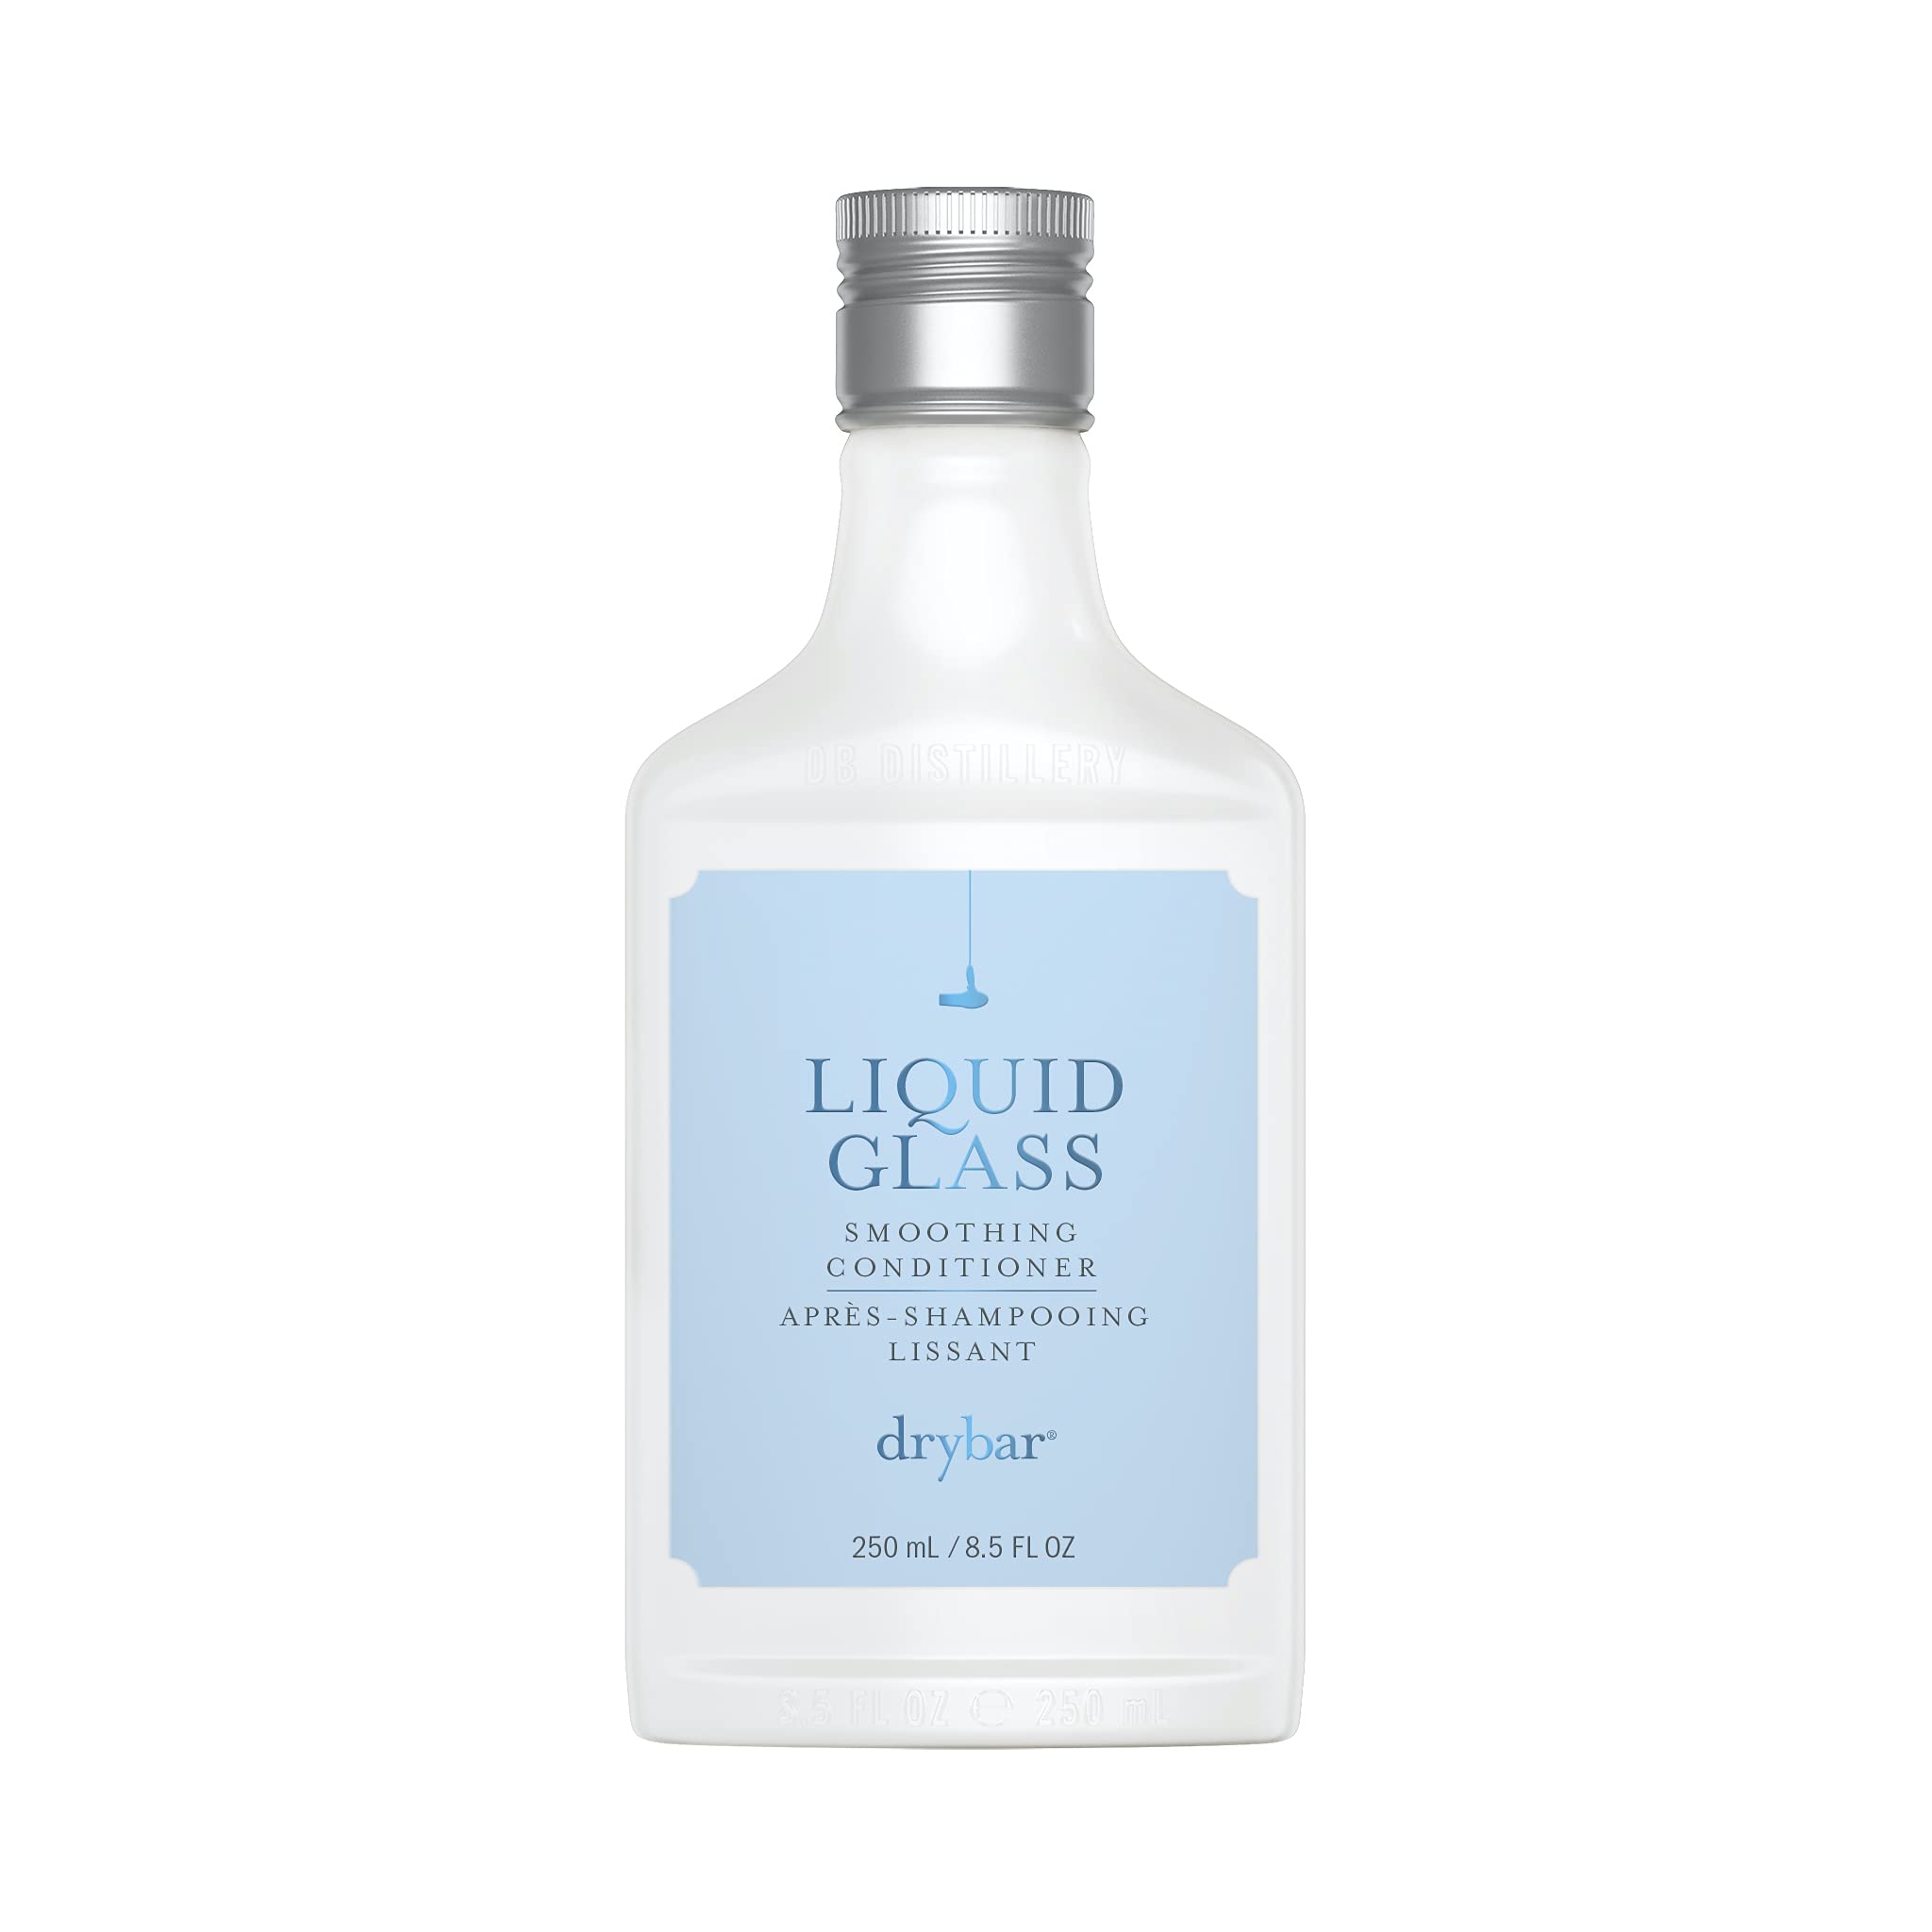 Drybar Liquid Glass Smoothing Conditioner, Blanc Scent | For a Smooth Hair Finish (8.5 fl. oz)